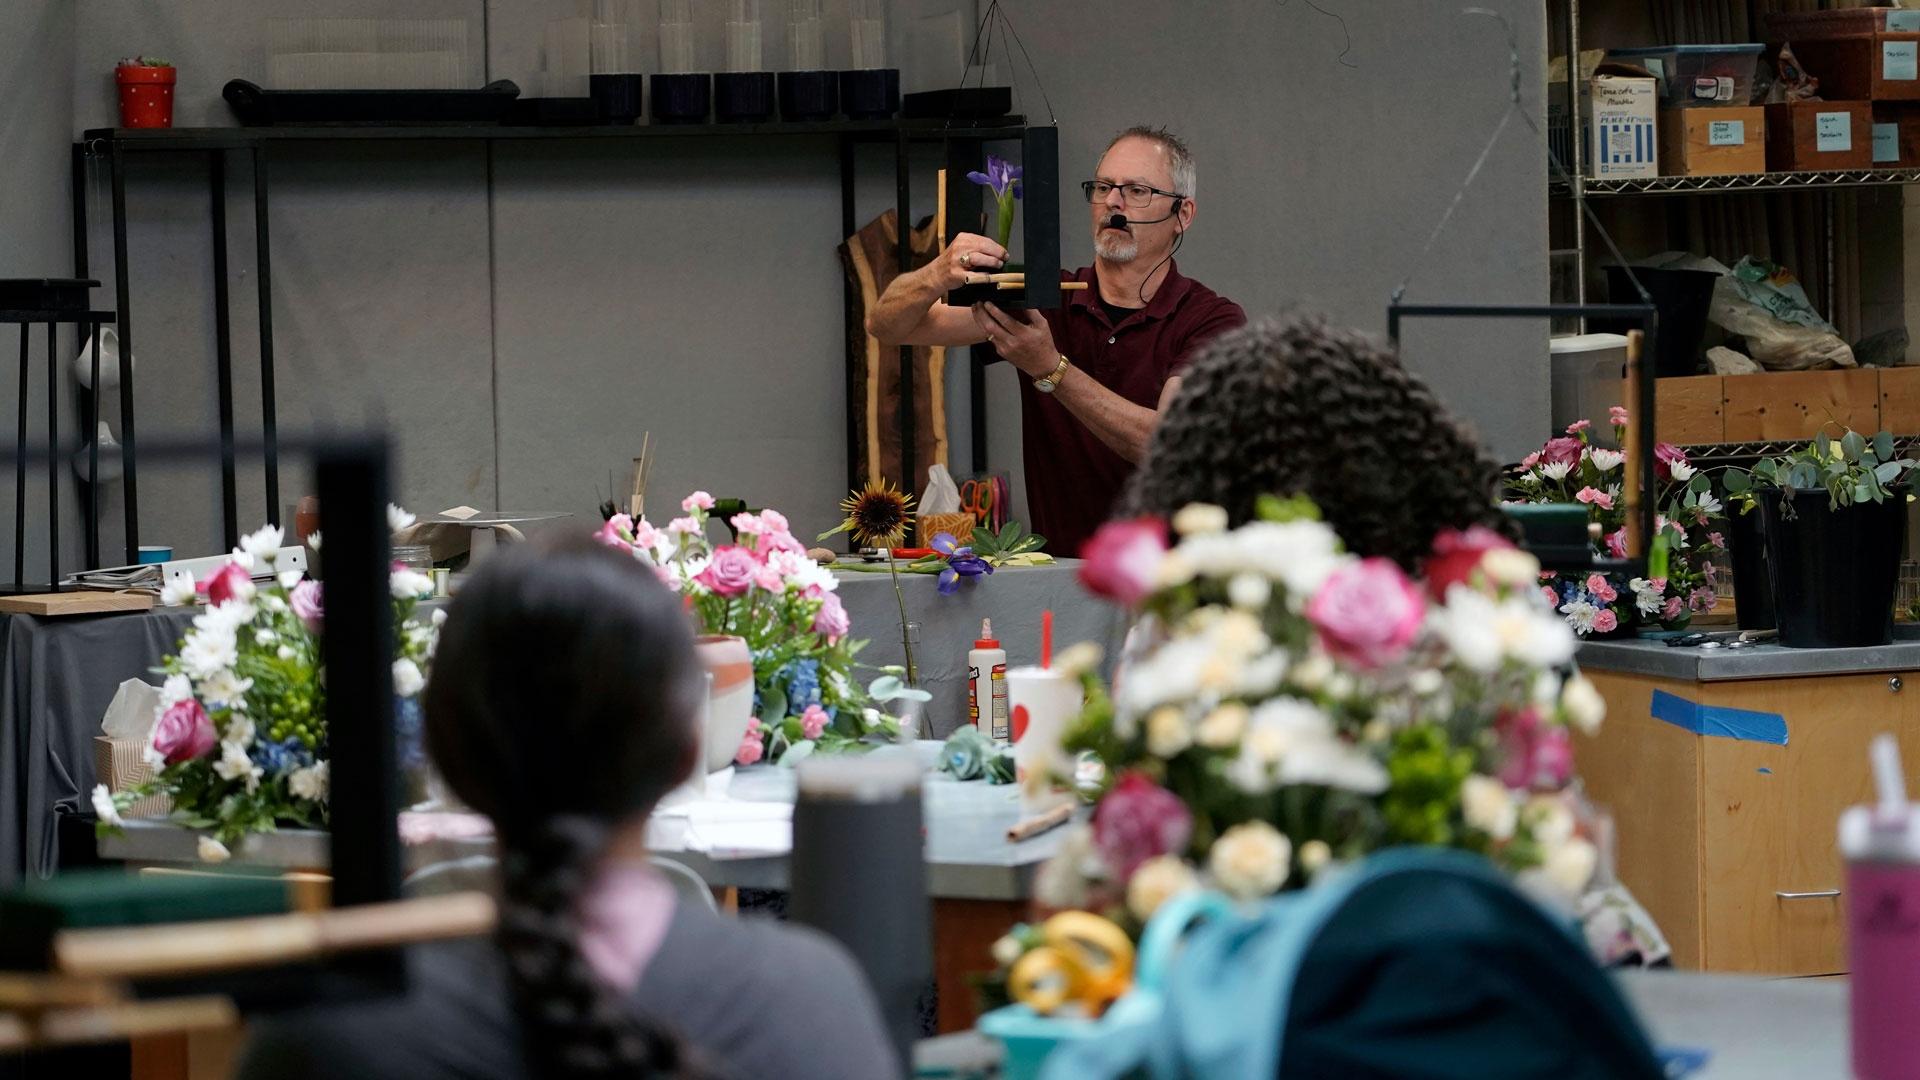 Floral design professor Bill McKinley demonstrates an arrangement for his class, as featured on Season 2 of "Texas A&M Today."